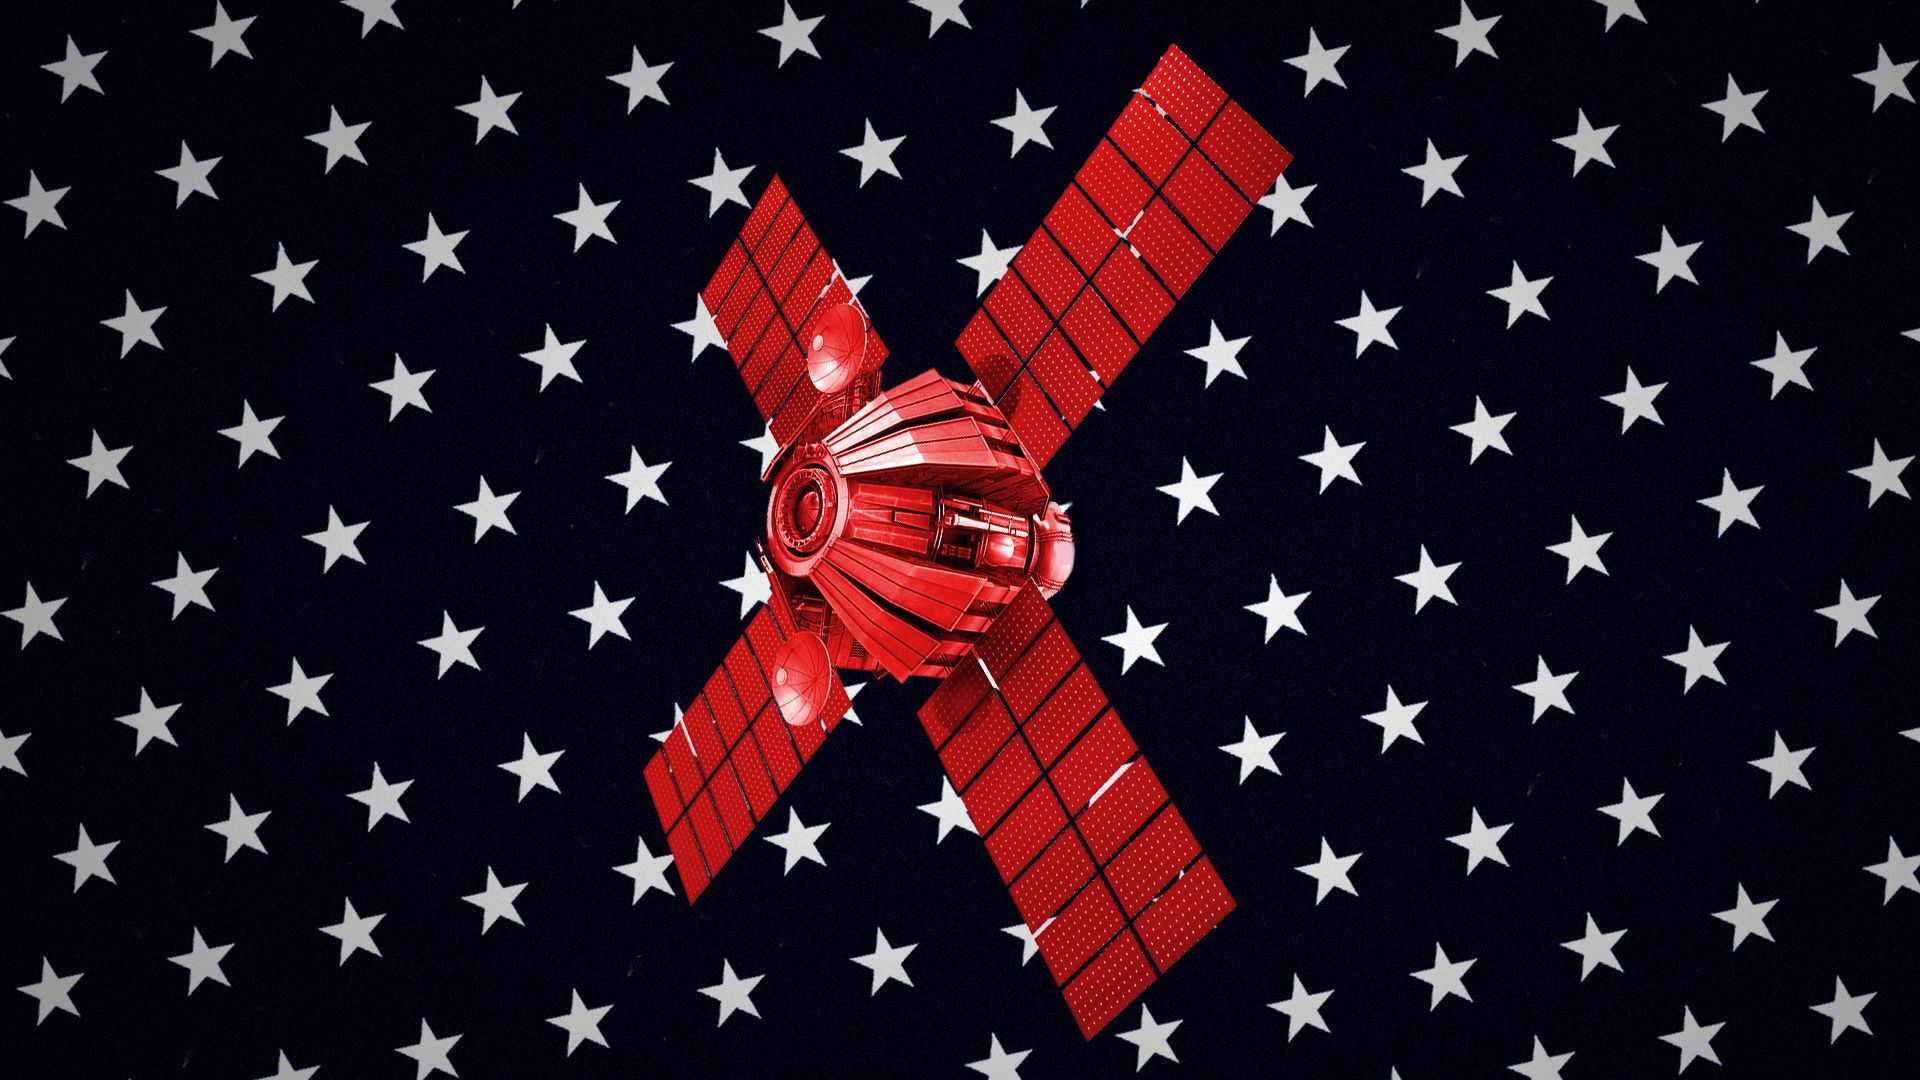 Illustration of a satellite in outer space made up of U.S. flag stars.